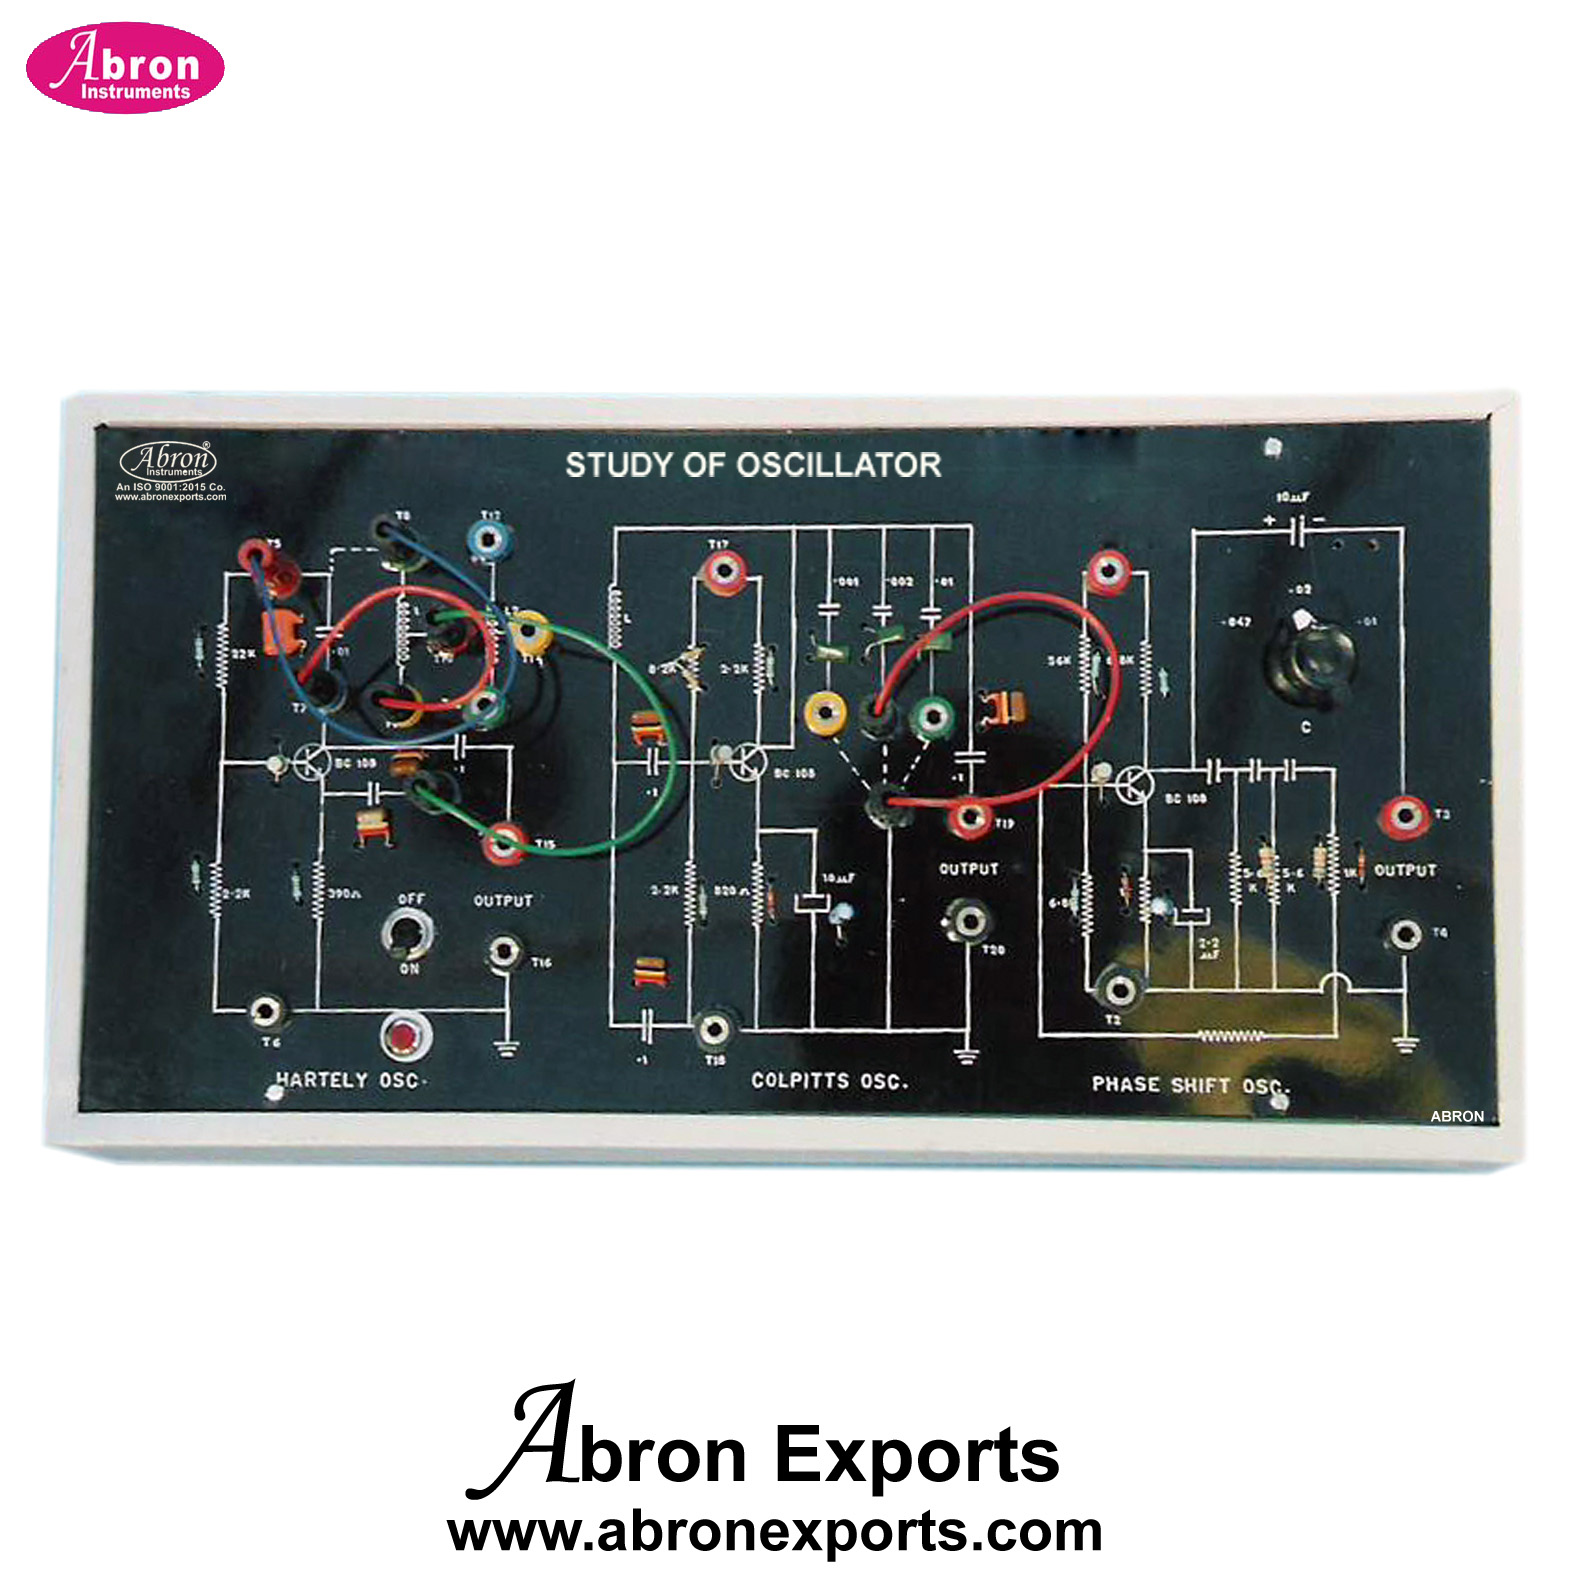 ETB Study of Oscillator Hartley Colpits Phase Shift Output to Study on CRO Training Board Supply Abron AE-1258HCP 